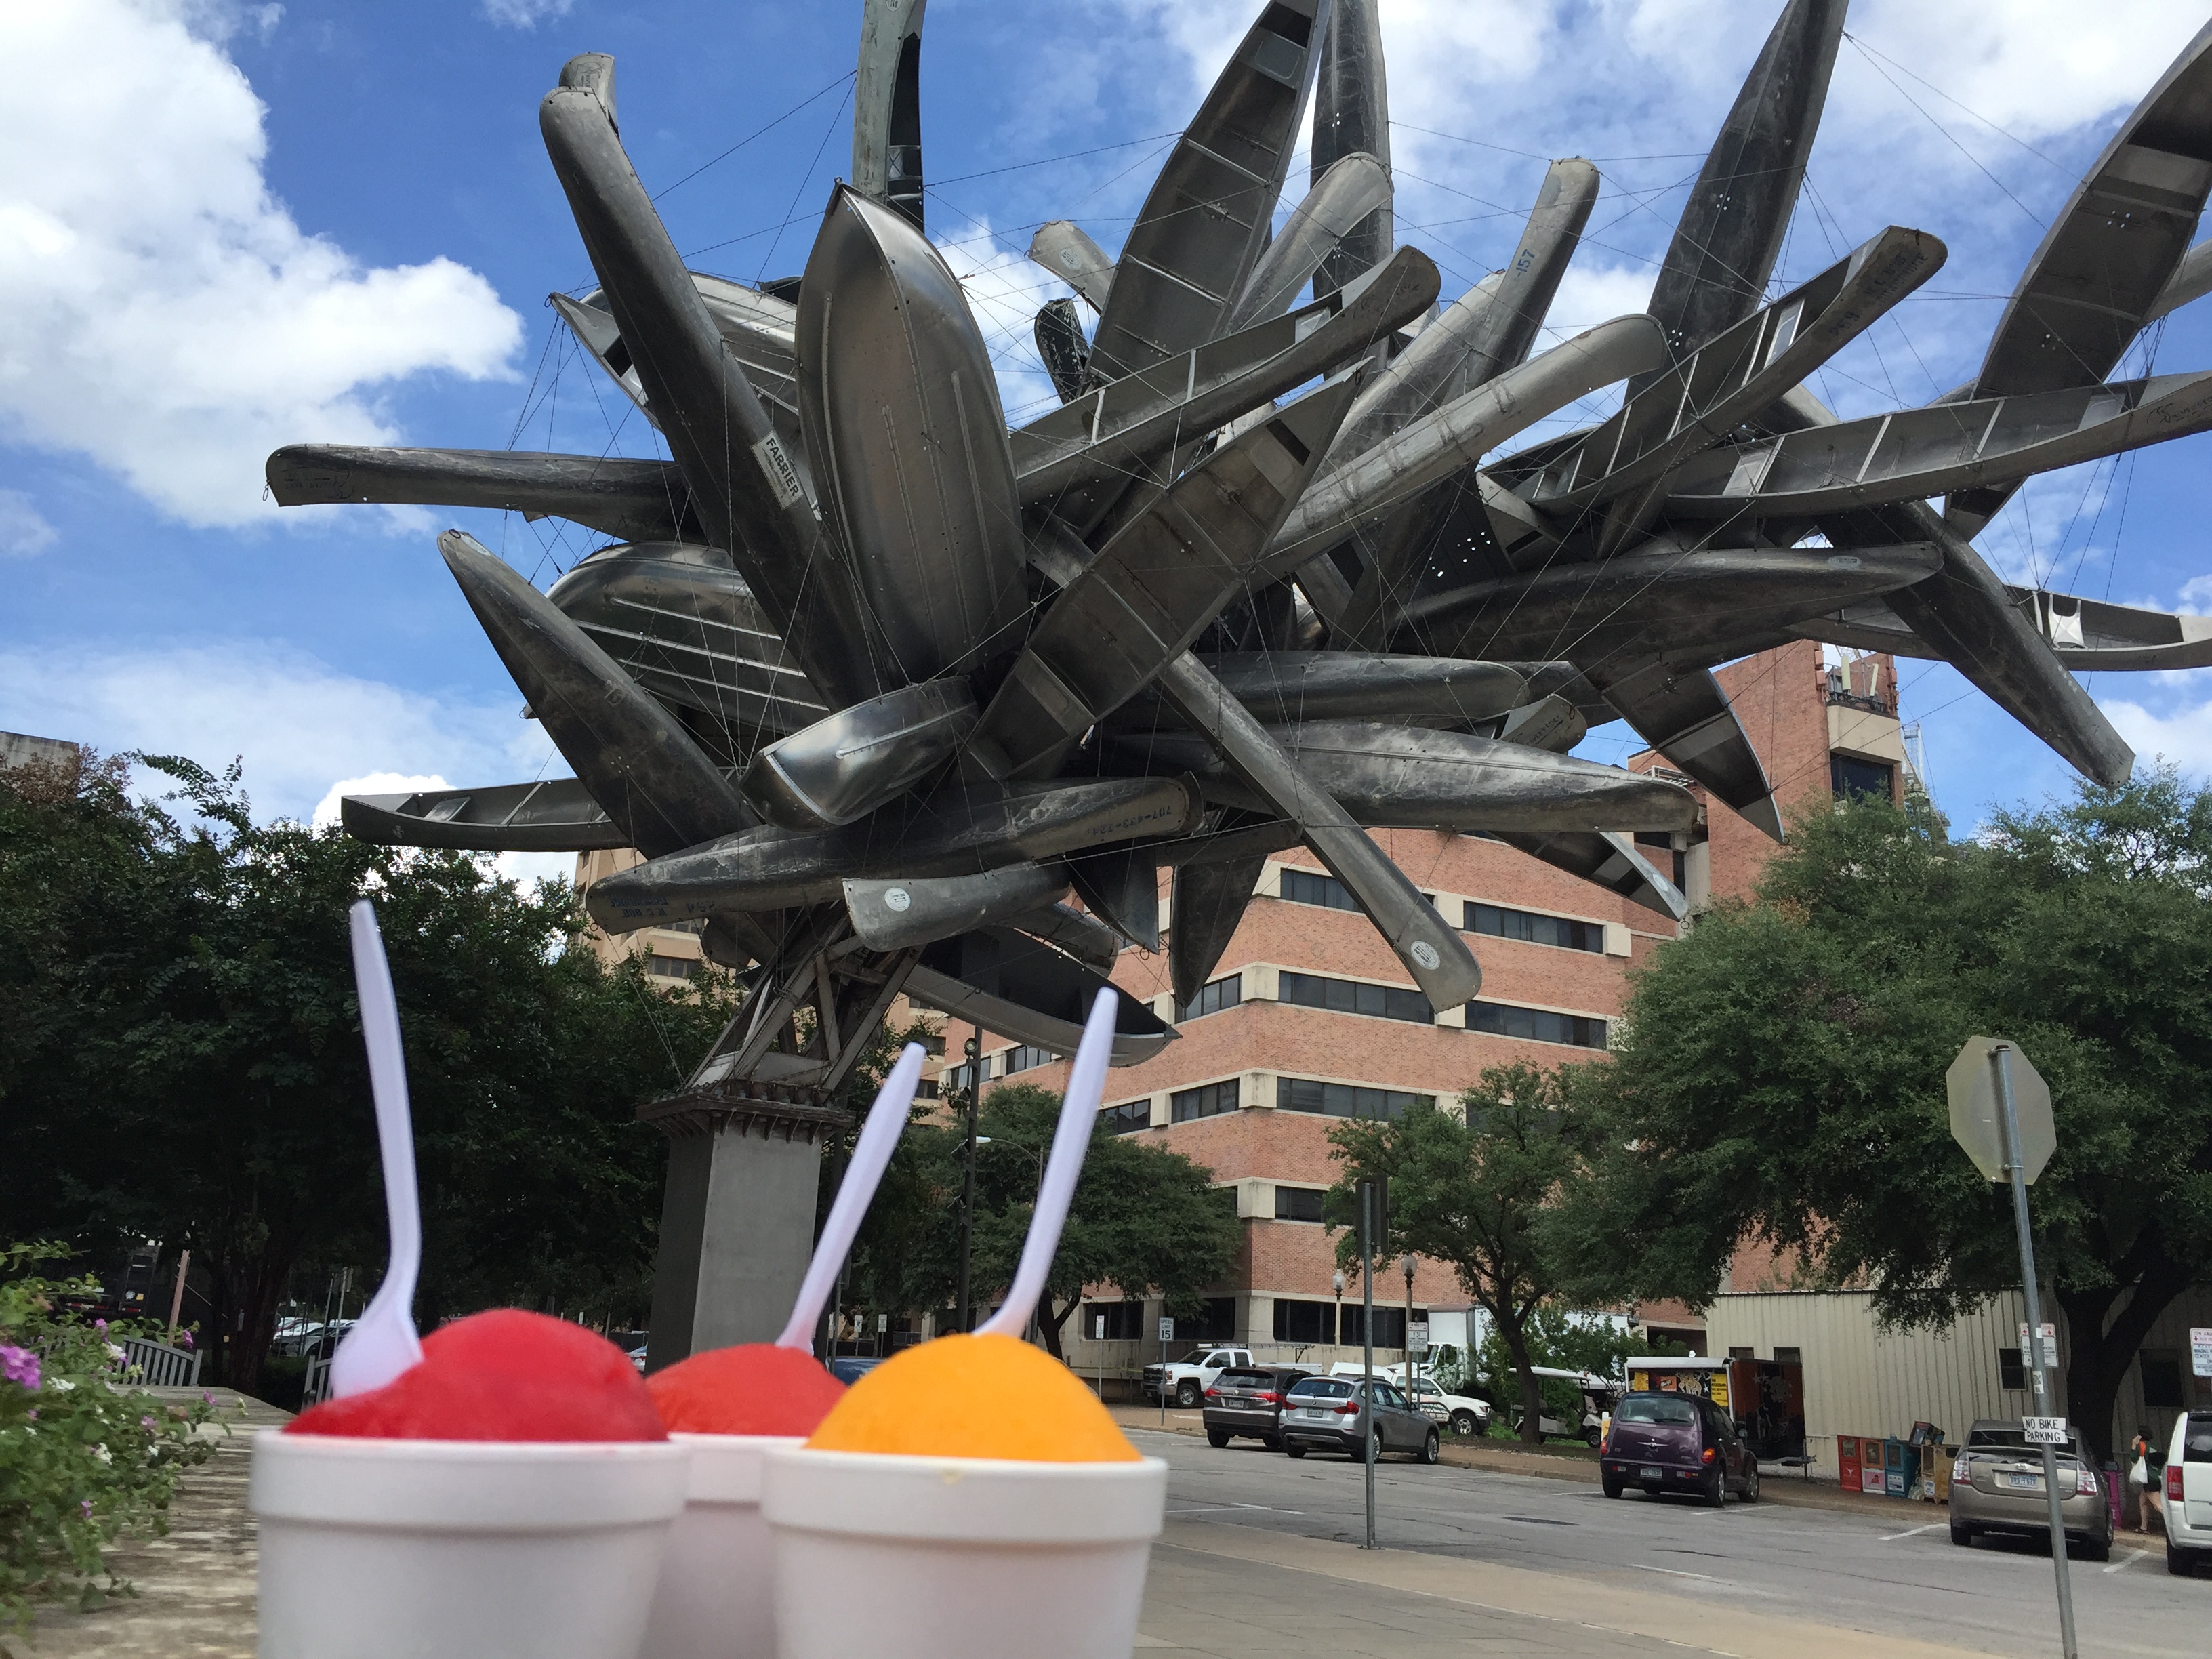 sculpture of canoes with snow cones